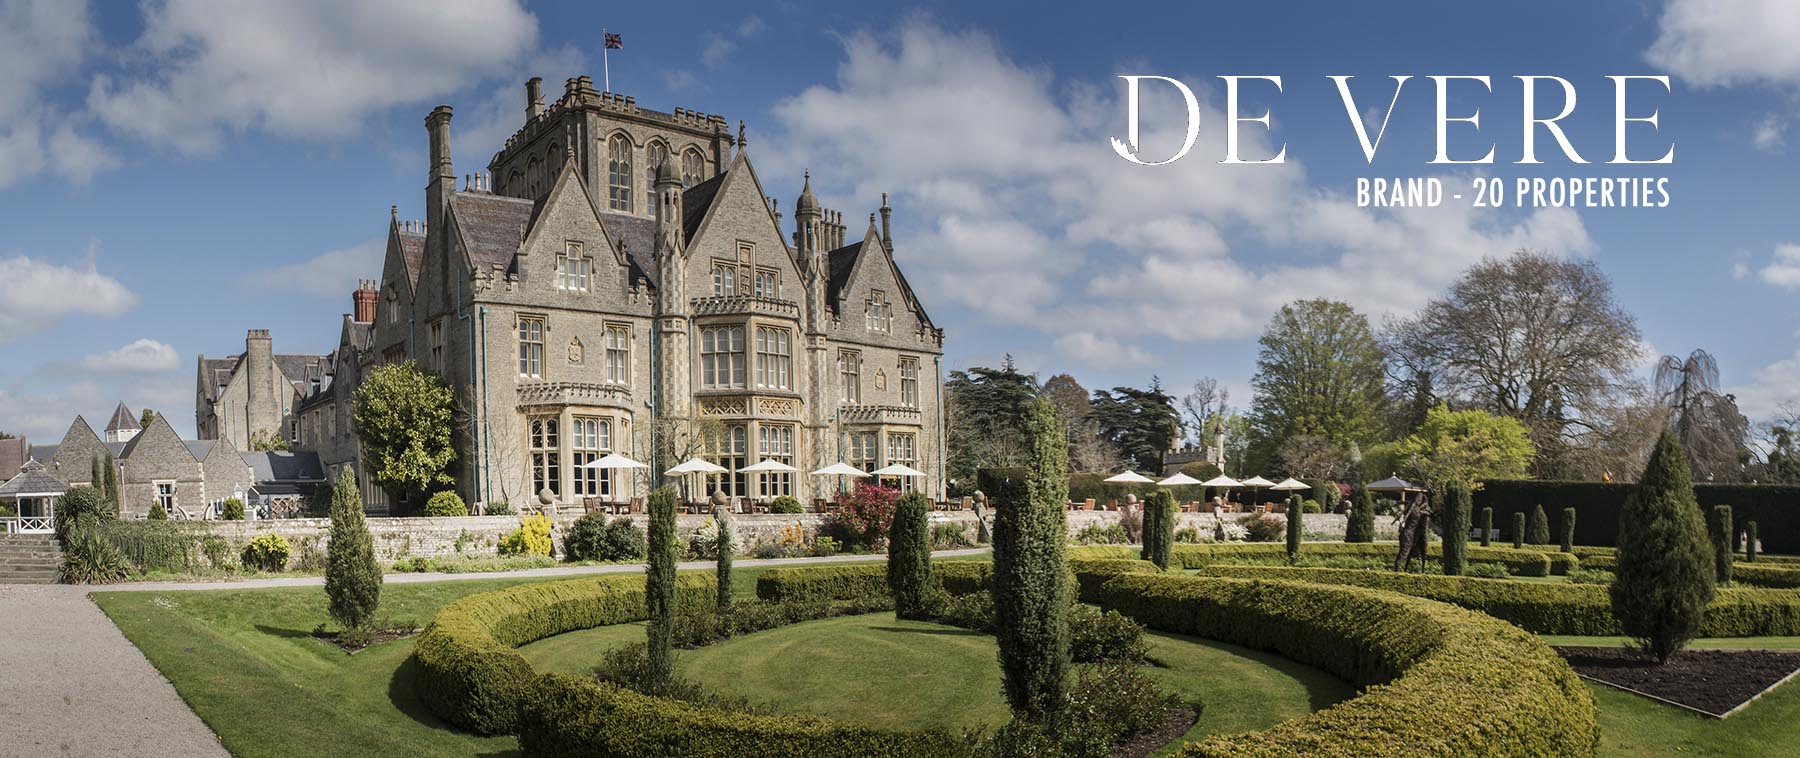 devere hotels - hotel photography and hotel video production